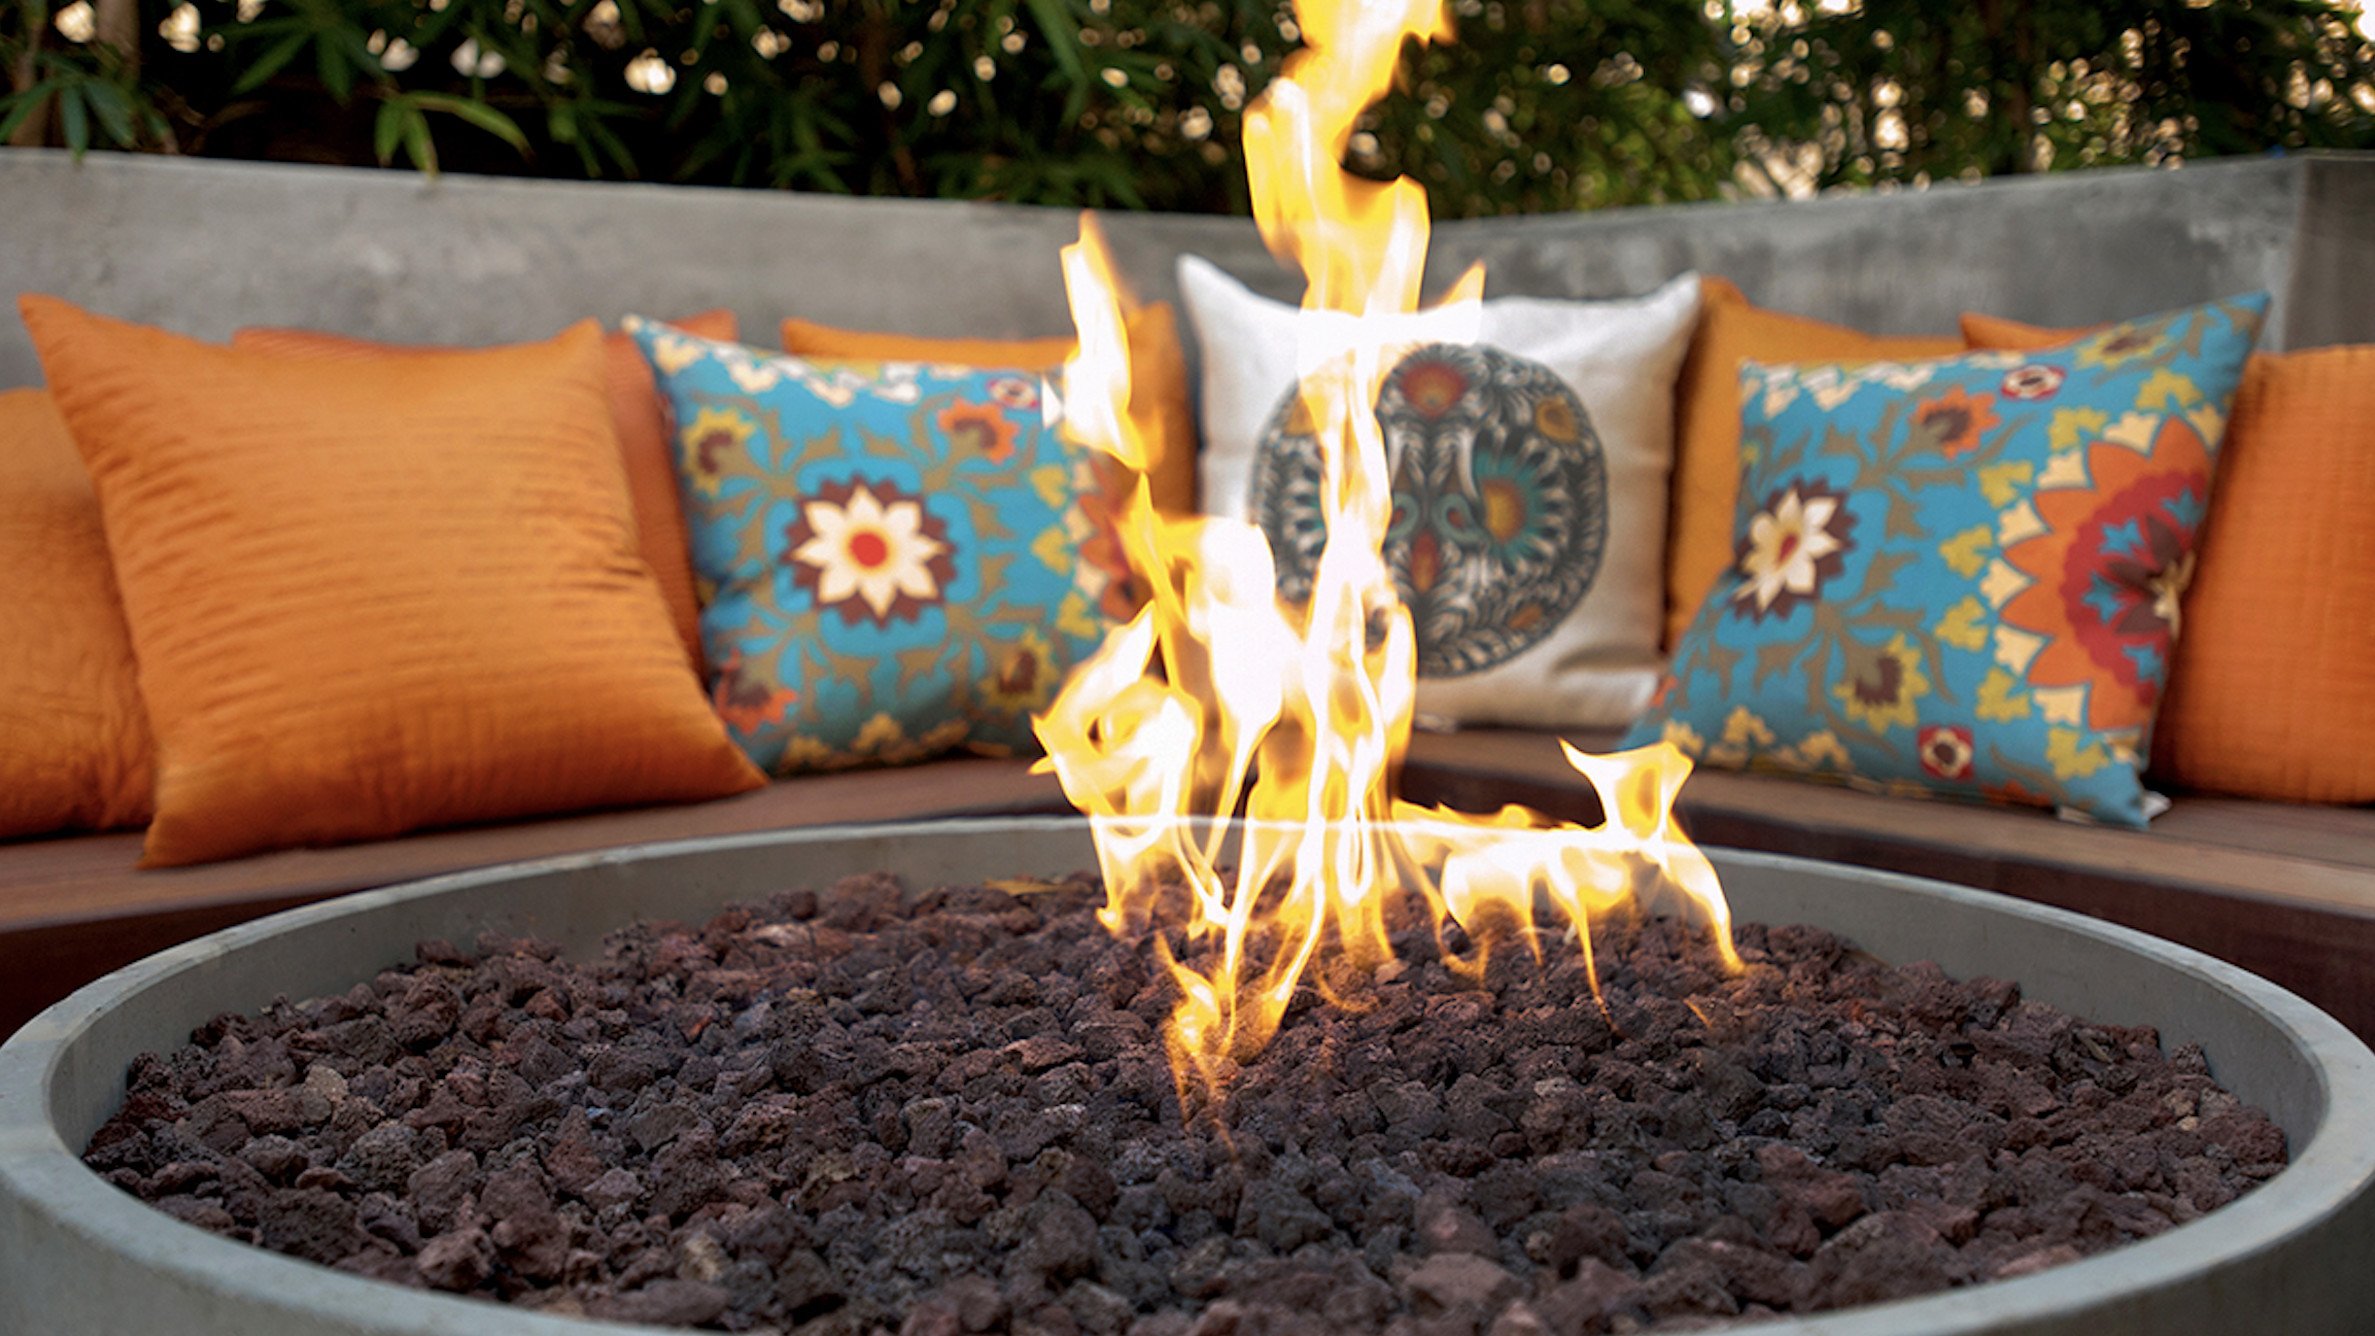 Are fire pits legal in New Mexico?